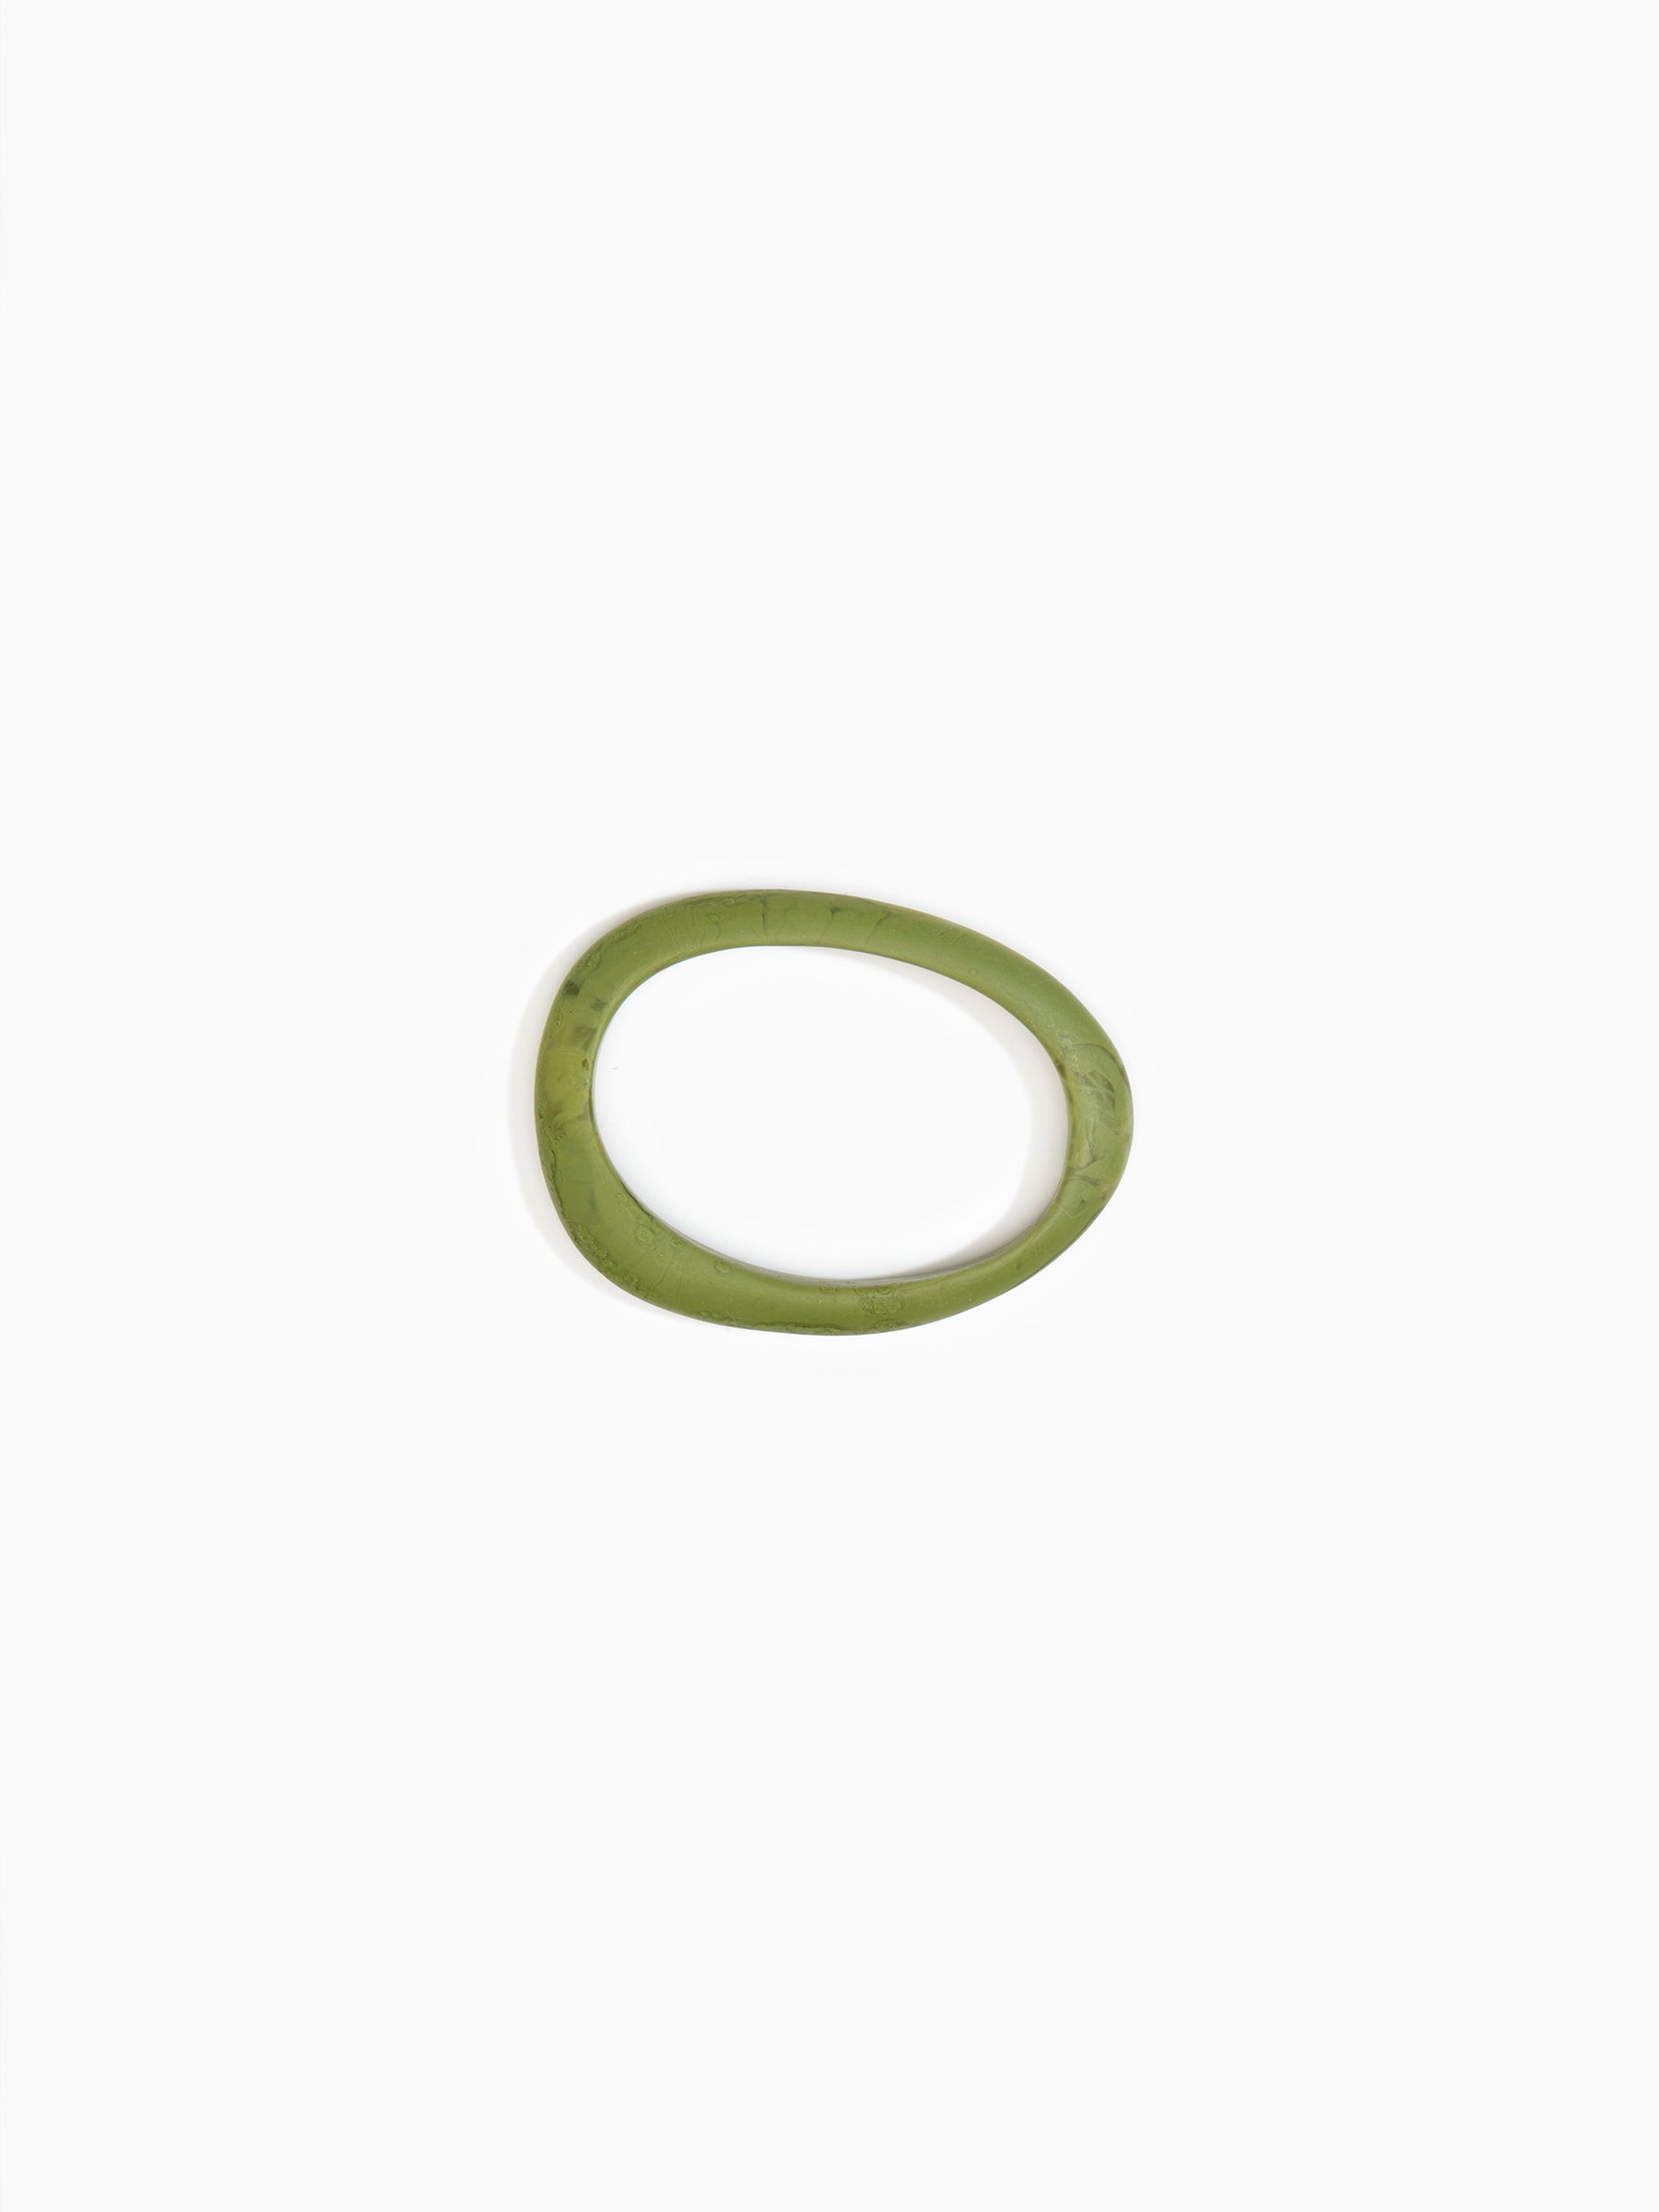 Dinosaur Designs Rock Wishbone Bangle Bracelets in Olive color resin with Narrow Fit